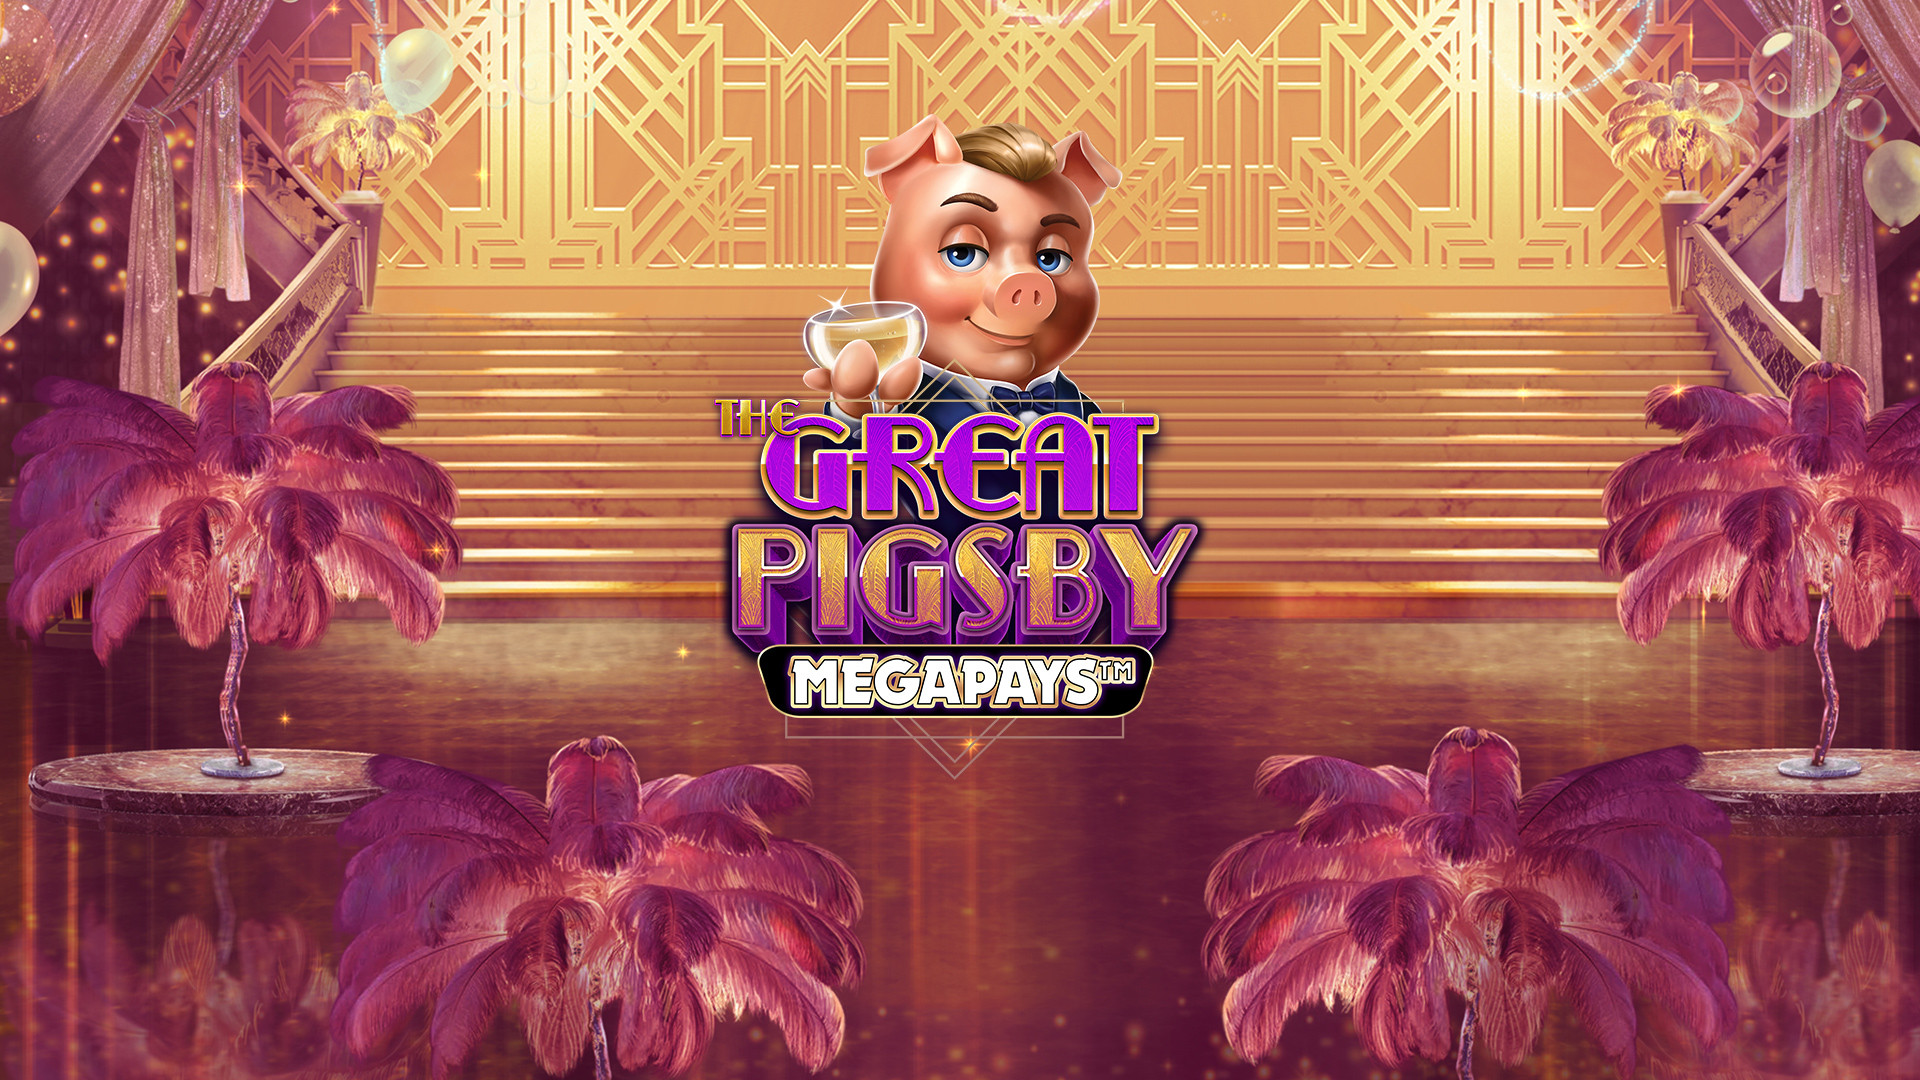 The Great Pigsby MEGAPAYS